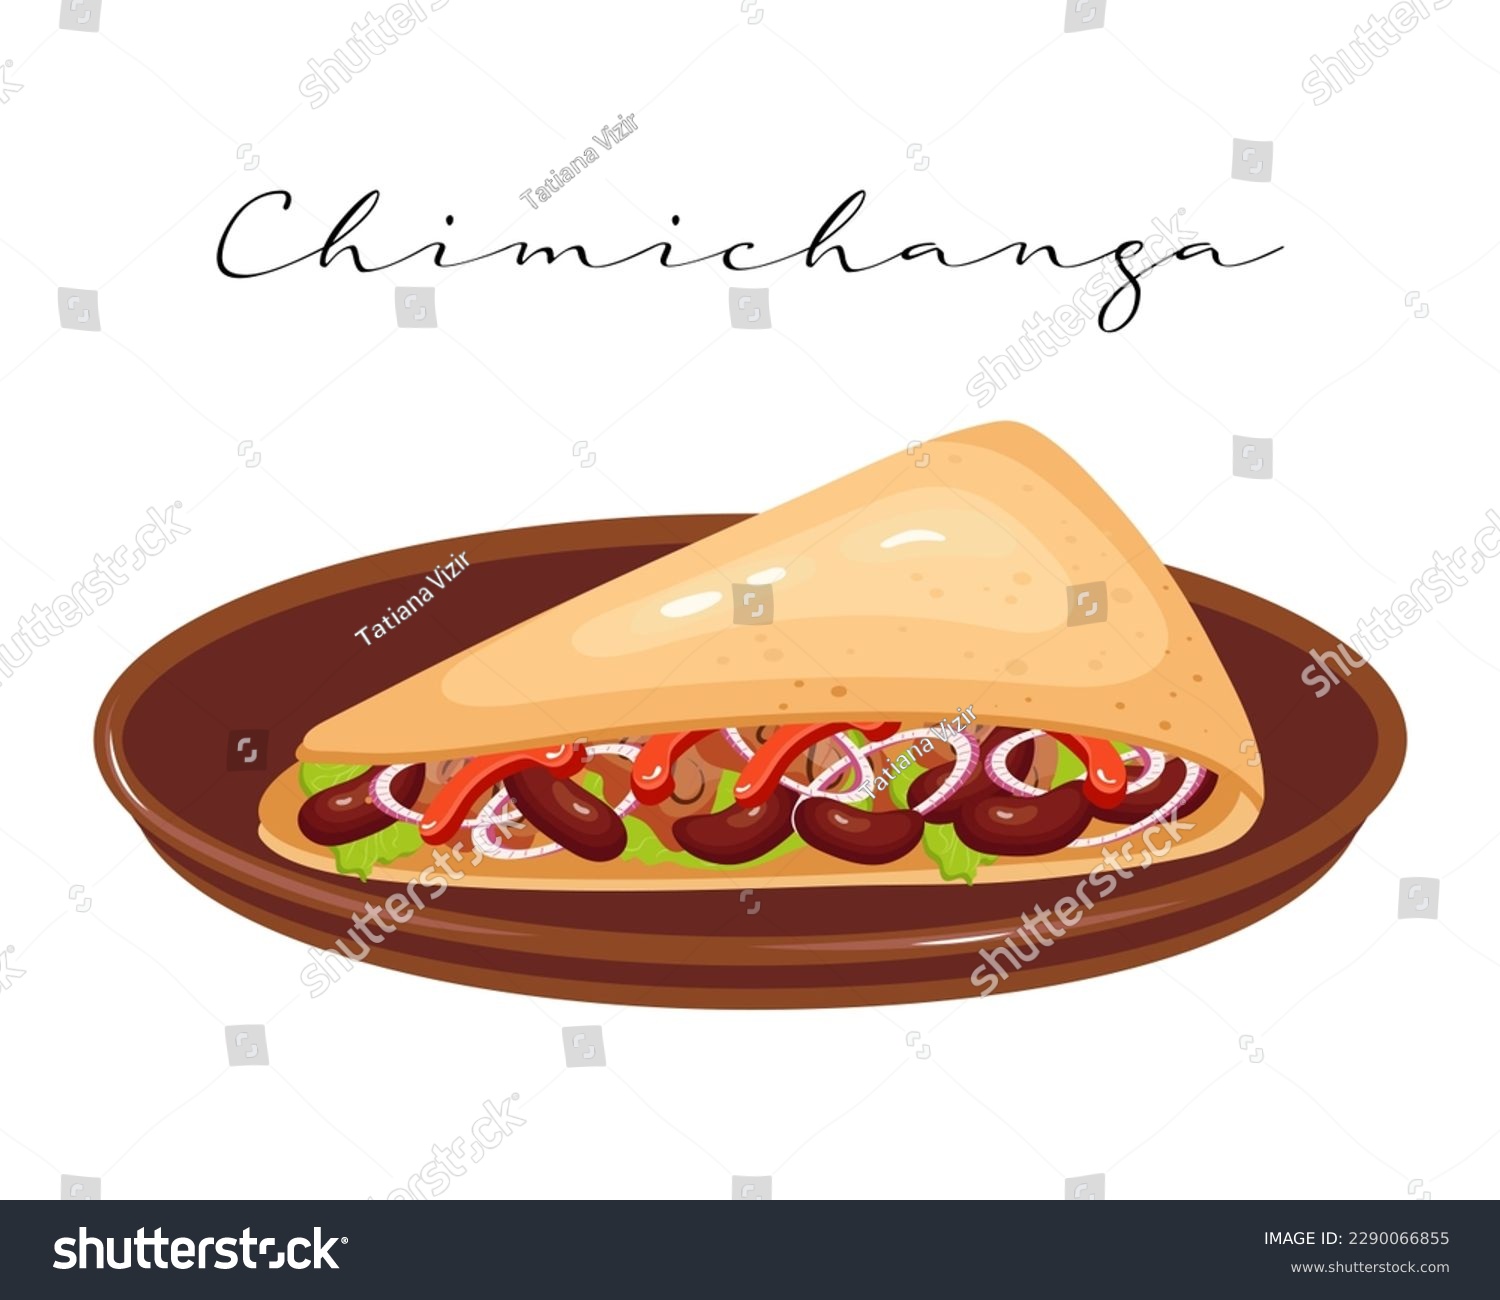 SVG of Flatbread with meat, chili and beans, Chimichanga, Latin American cuisine. National cuisine of Mexico. Food illustration, vector	
 svg